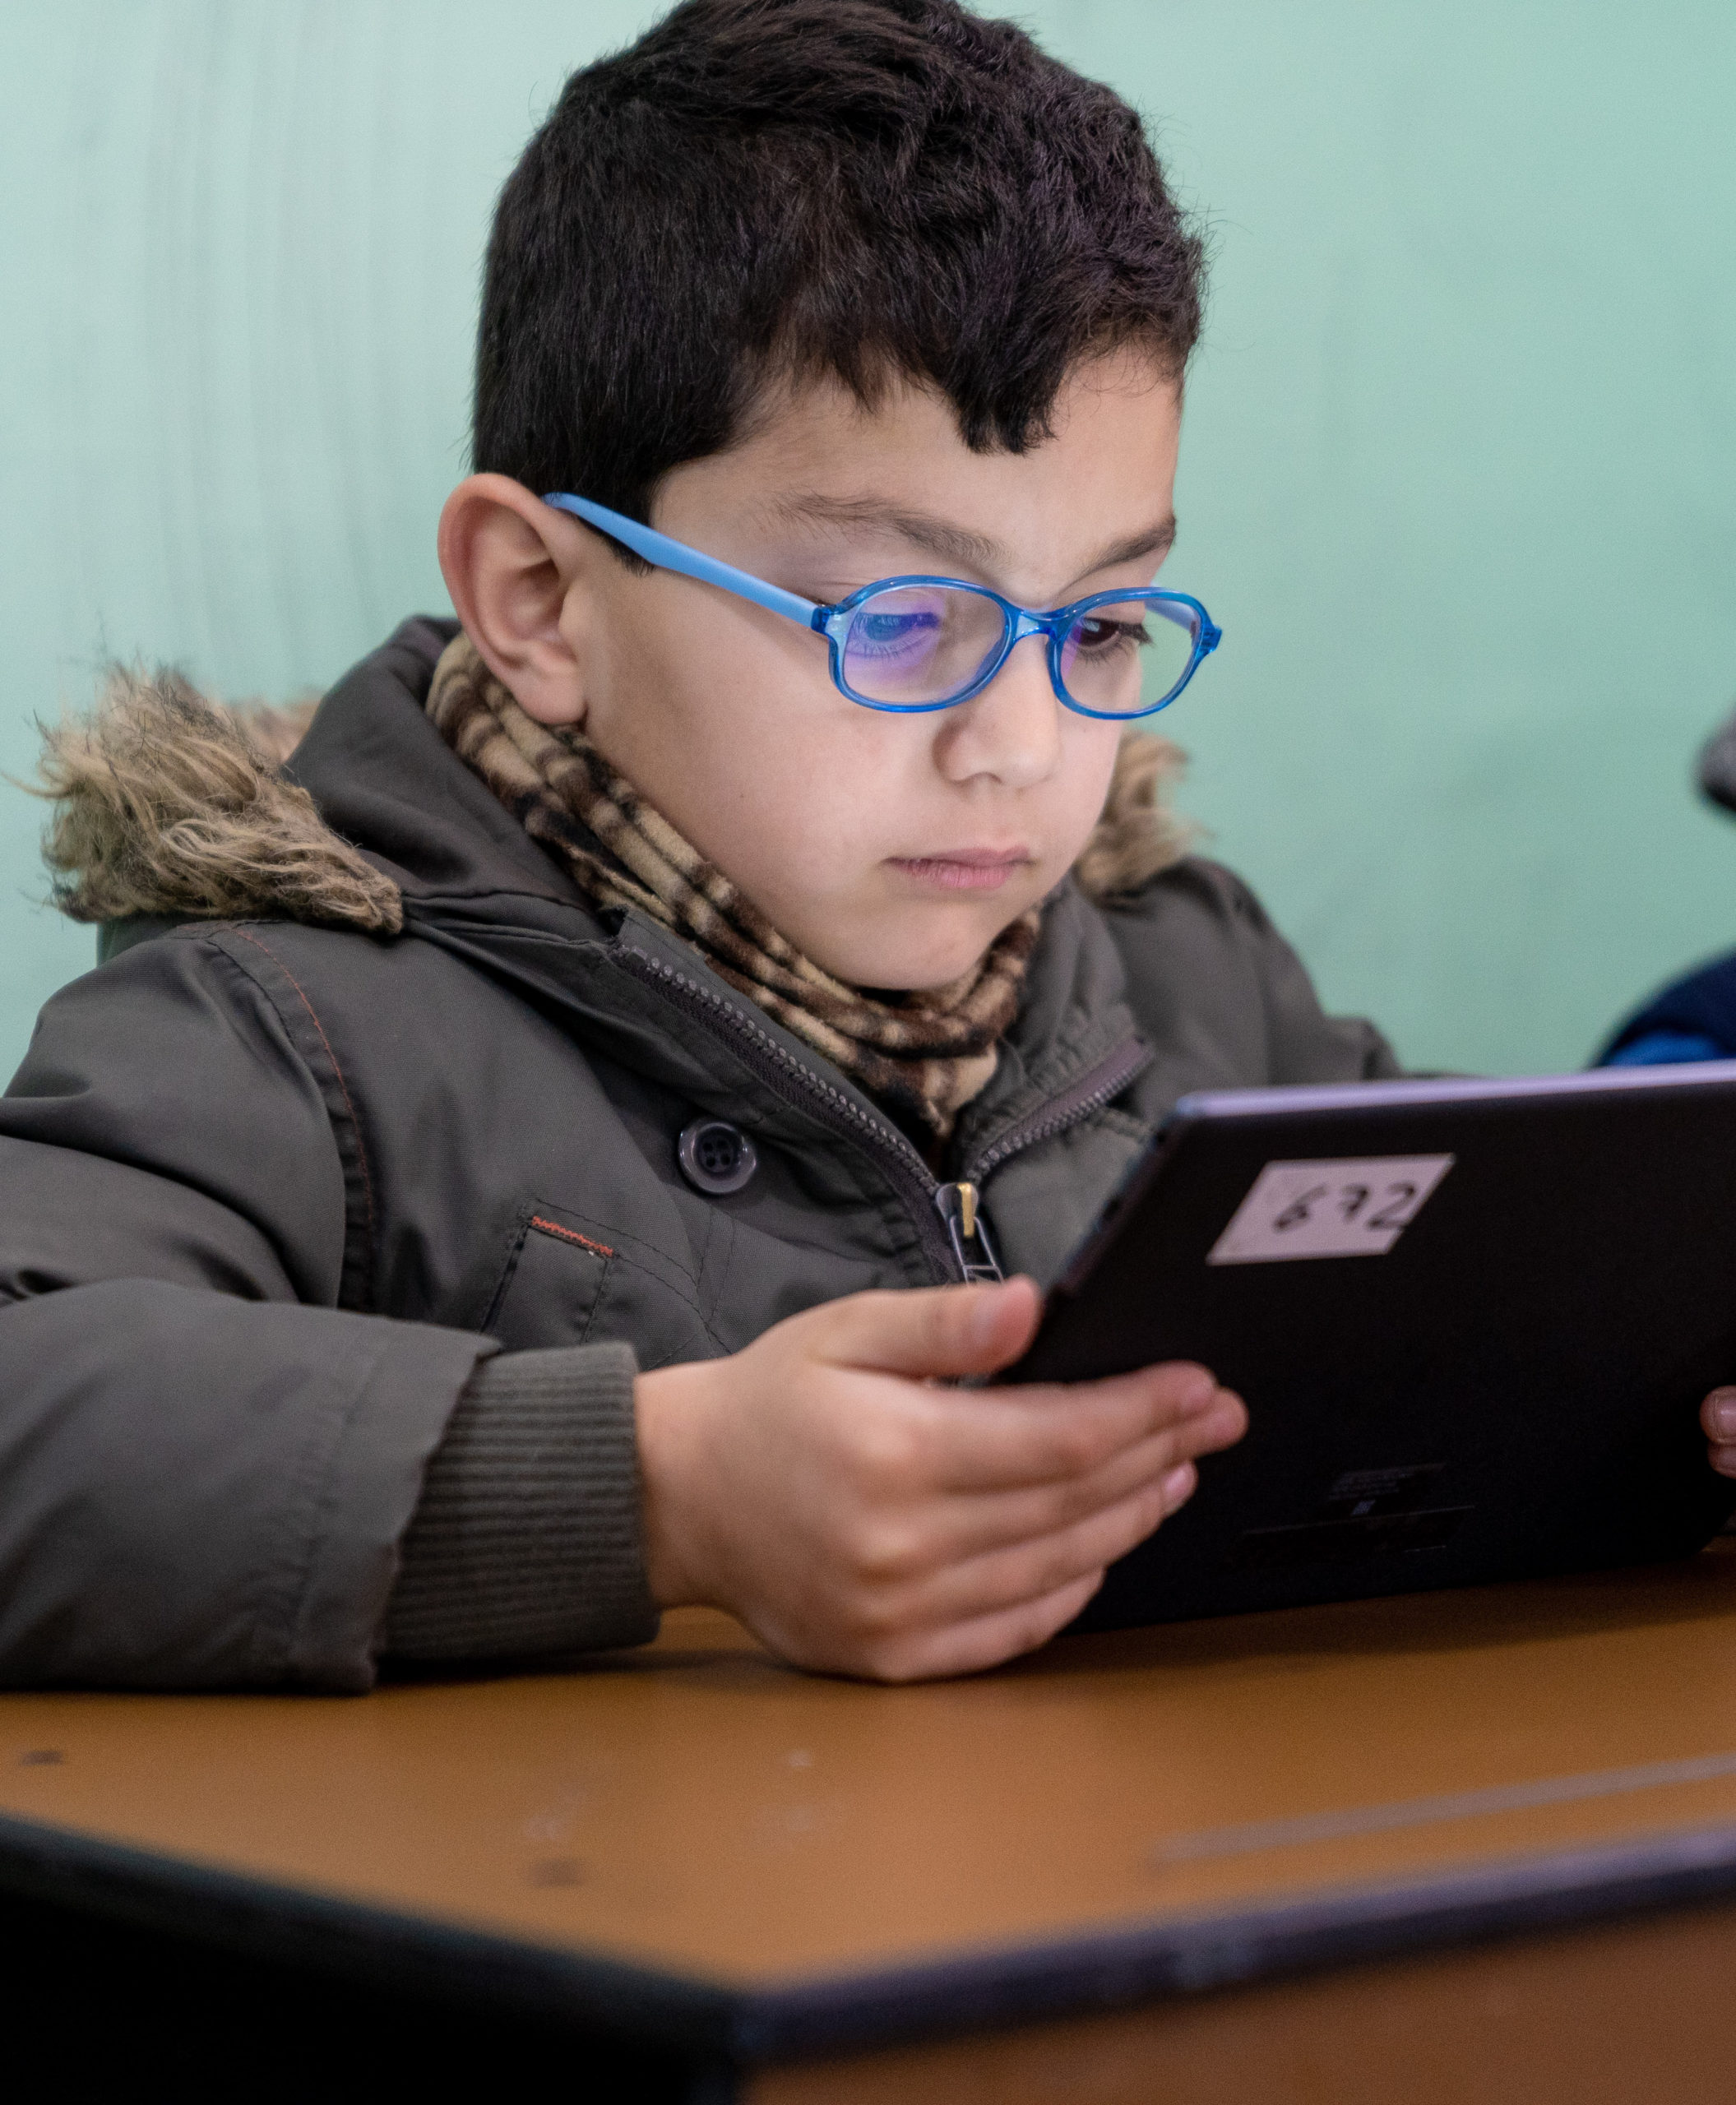 "I like to use the tablet. It has pictures, animations, songs and other things. It is useful for our studies," said Rayyan, 7 years in his school.

A new multimedia learning programme is promoting literacy and social cohesion in Jordan.

The multimedia enrichment educational materials support children's learning through extracurricular classes with the aim of promoting life skills and social cohesion. More than 100 stories are helping children from Kindergarten to 3rd Grade develop their critical thinking and communication skills, while also promoting respect, participation and equity among students.

These materials have been developed and produced in line with the national curriculum and teachers have been provided with teaching aids that encourage innovation, critical thinking, communication skills and promote social values among students. 

Additionally, teachers trained on the use of these materials through the integration of ICT, which will target around 50,000 Jordanian and Syrian students.

The programme, first implemented in 10 pilot schools, is being scaled up with UNICEF support and rolled out to 100 schools throughout the country in partnership with the Ministry of Education. This includes double-shifted schools in the host community, created to support Syrian refugee students.

The multimedia programme is generously supported by UK aid.

A new multimedia learning programme is promoting literacy and social cohesion in Jordan.

The multimedia enrichment educational materials support children's learning through extracurricular classes with the aim of promoting life skills and social cohesion. More than 100 stories are helping children from Kindergarten to 3rd Grade develop their critical thinking and communication skills, while also promoting respect, participation and equity among students.

These materials have been developed and produced in line with the national curriculum and teachers have been provided with teaching aids that encourage innovation,